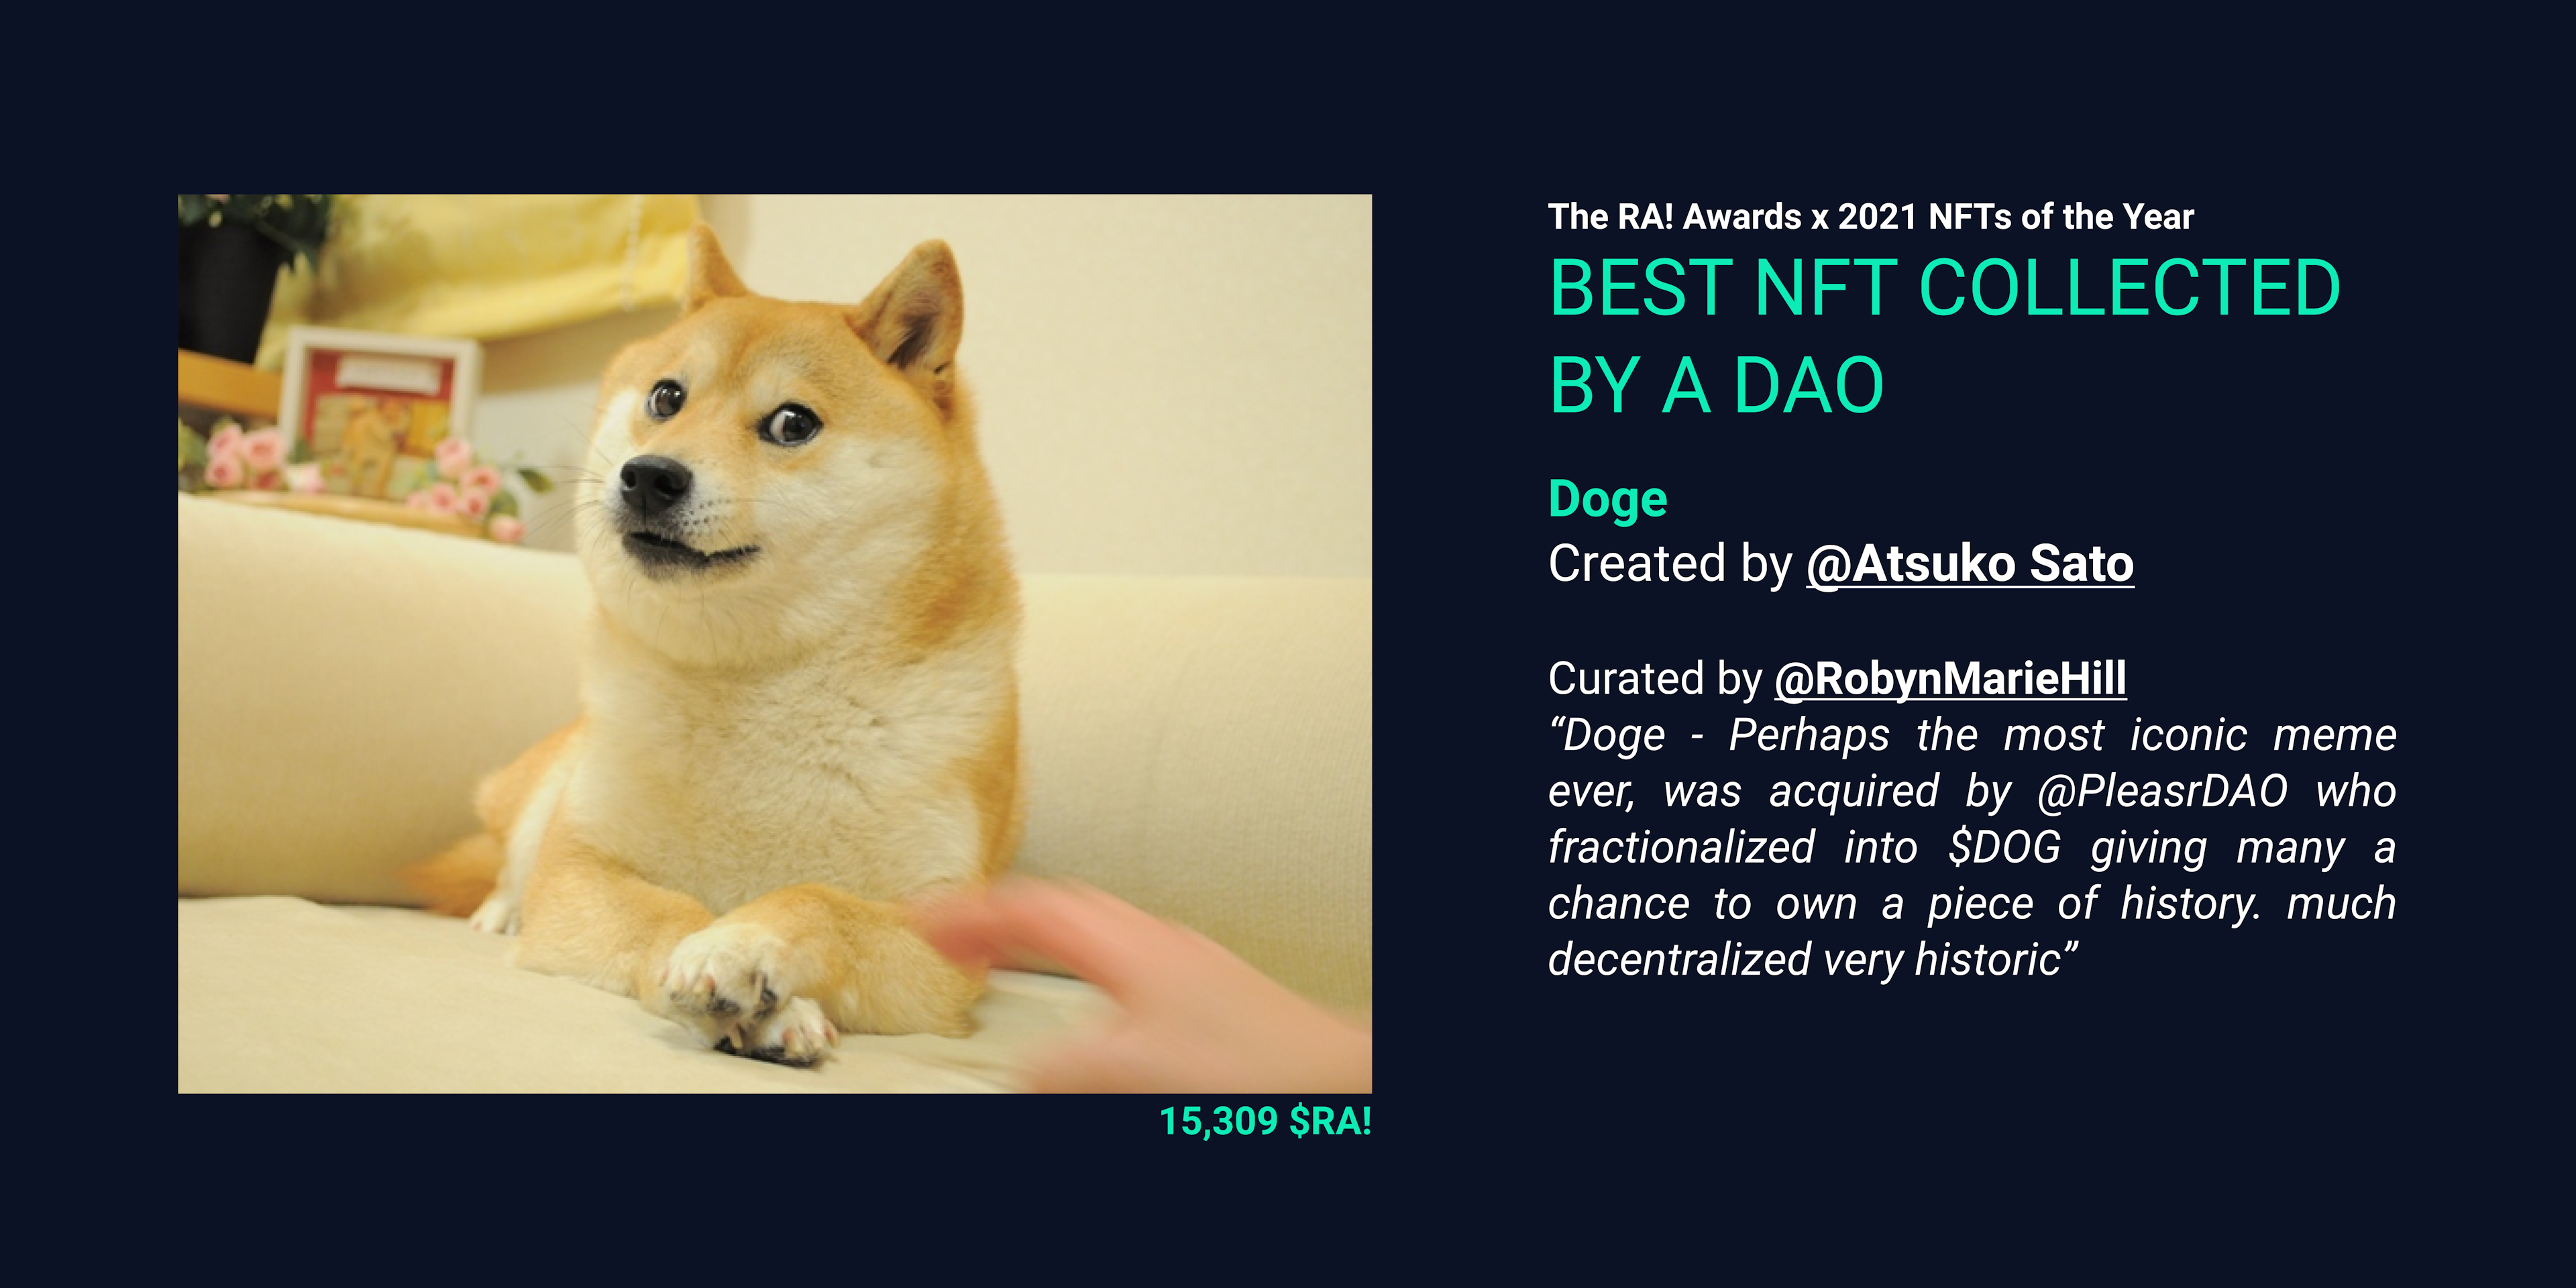 Doge won Best NFT Collected by a DAO in 2021